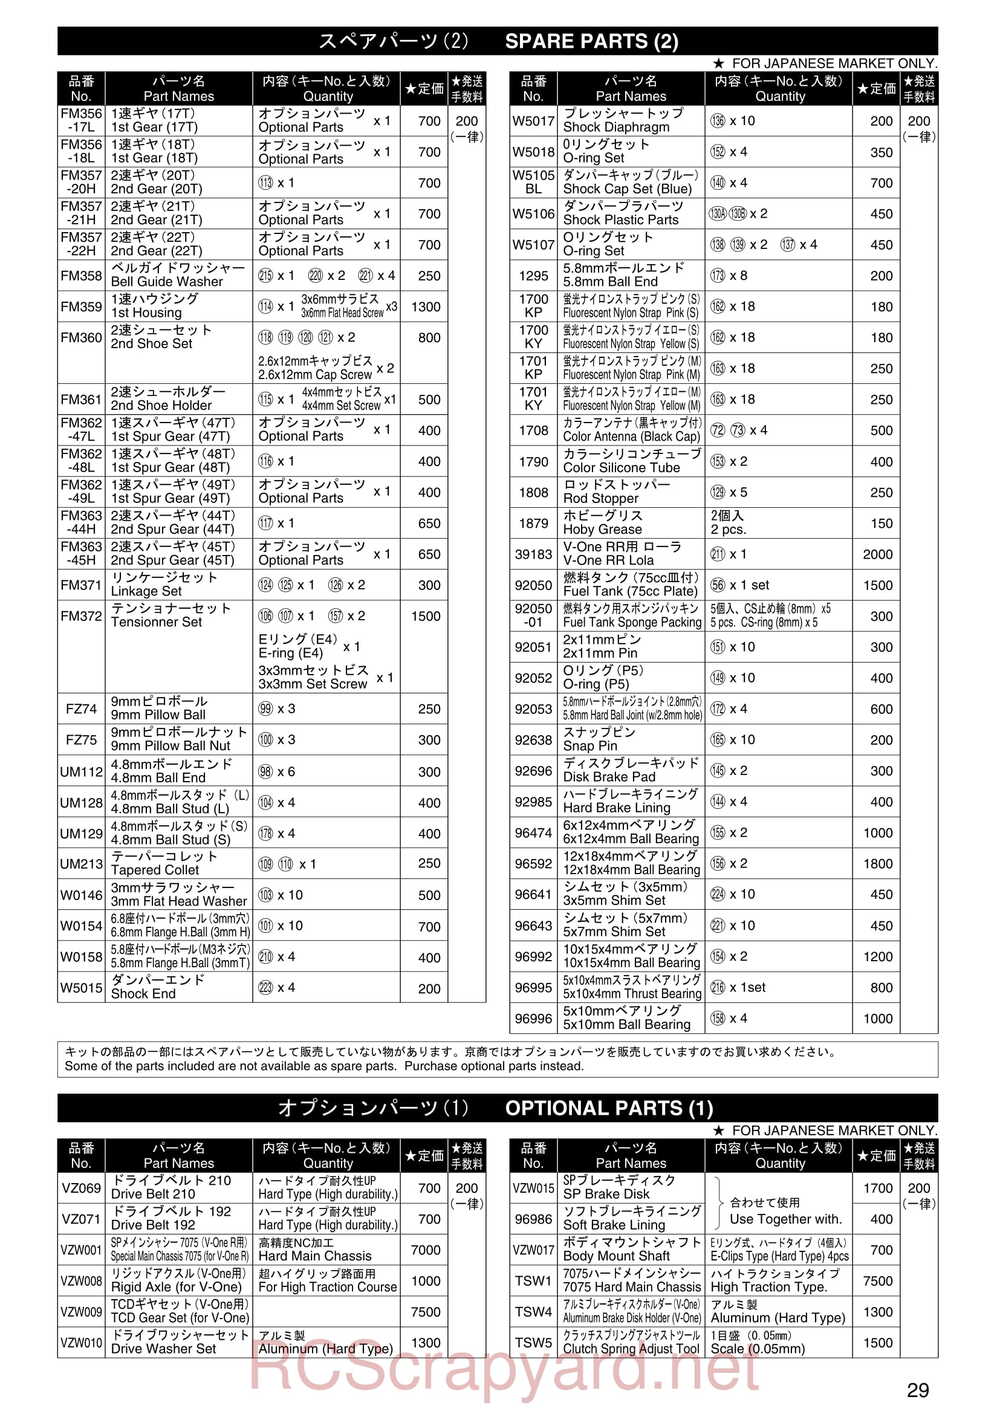 Kyosho - 31102 - V-One RR - Manual - Page 28